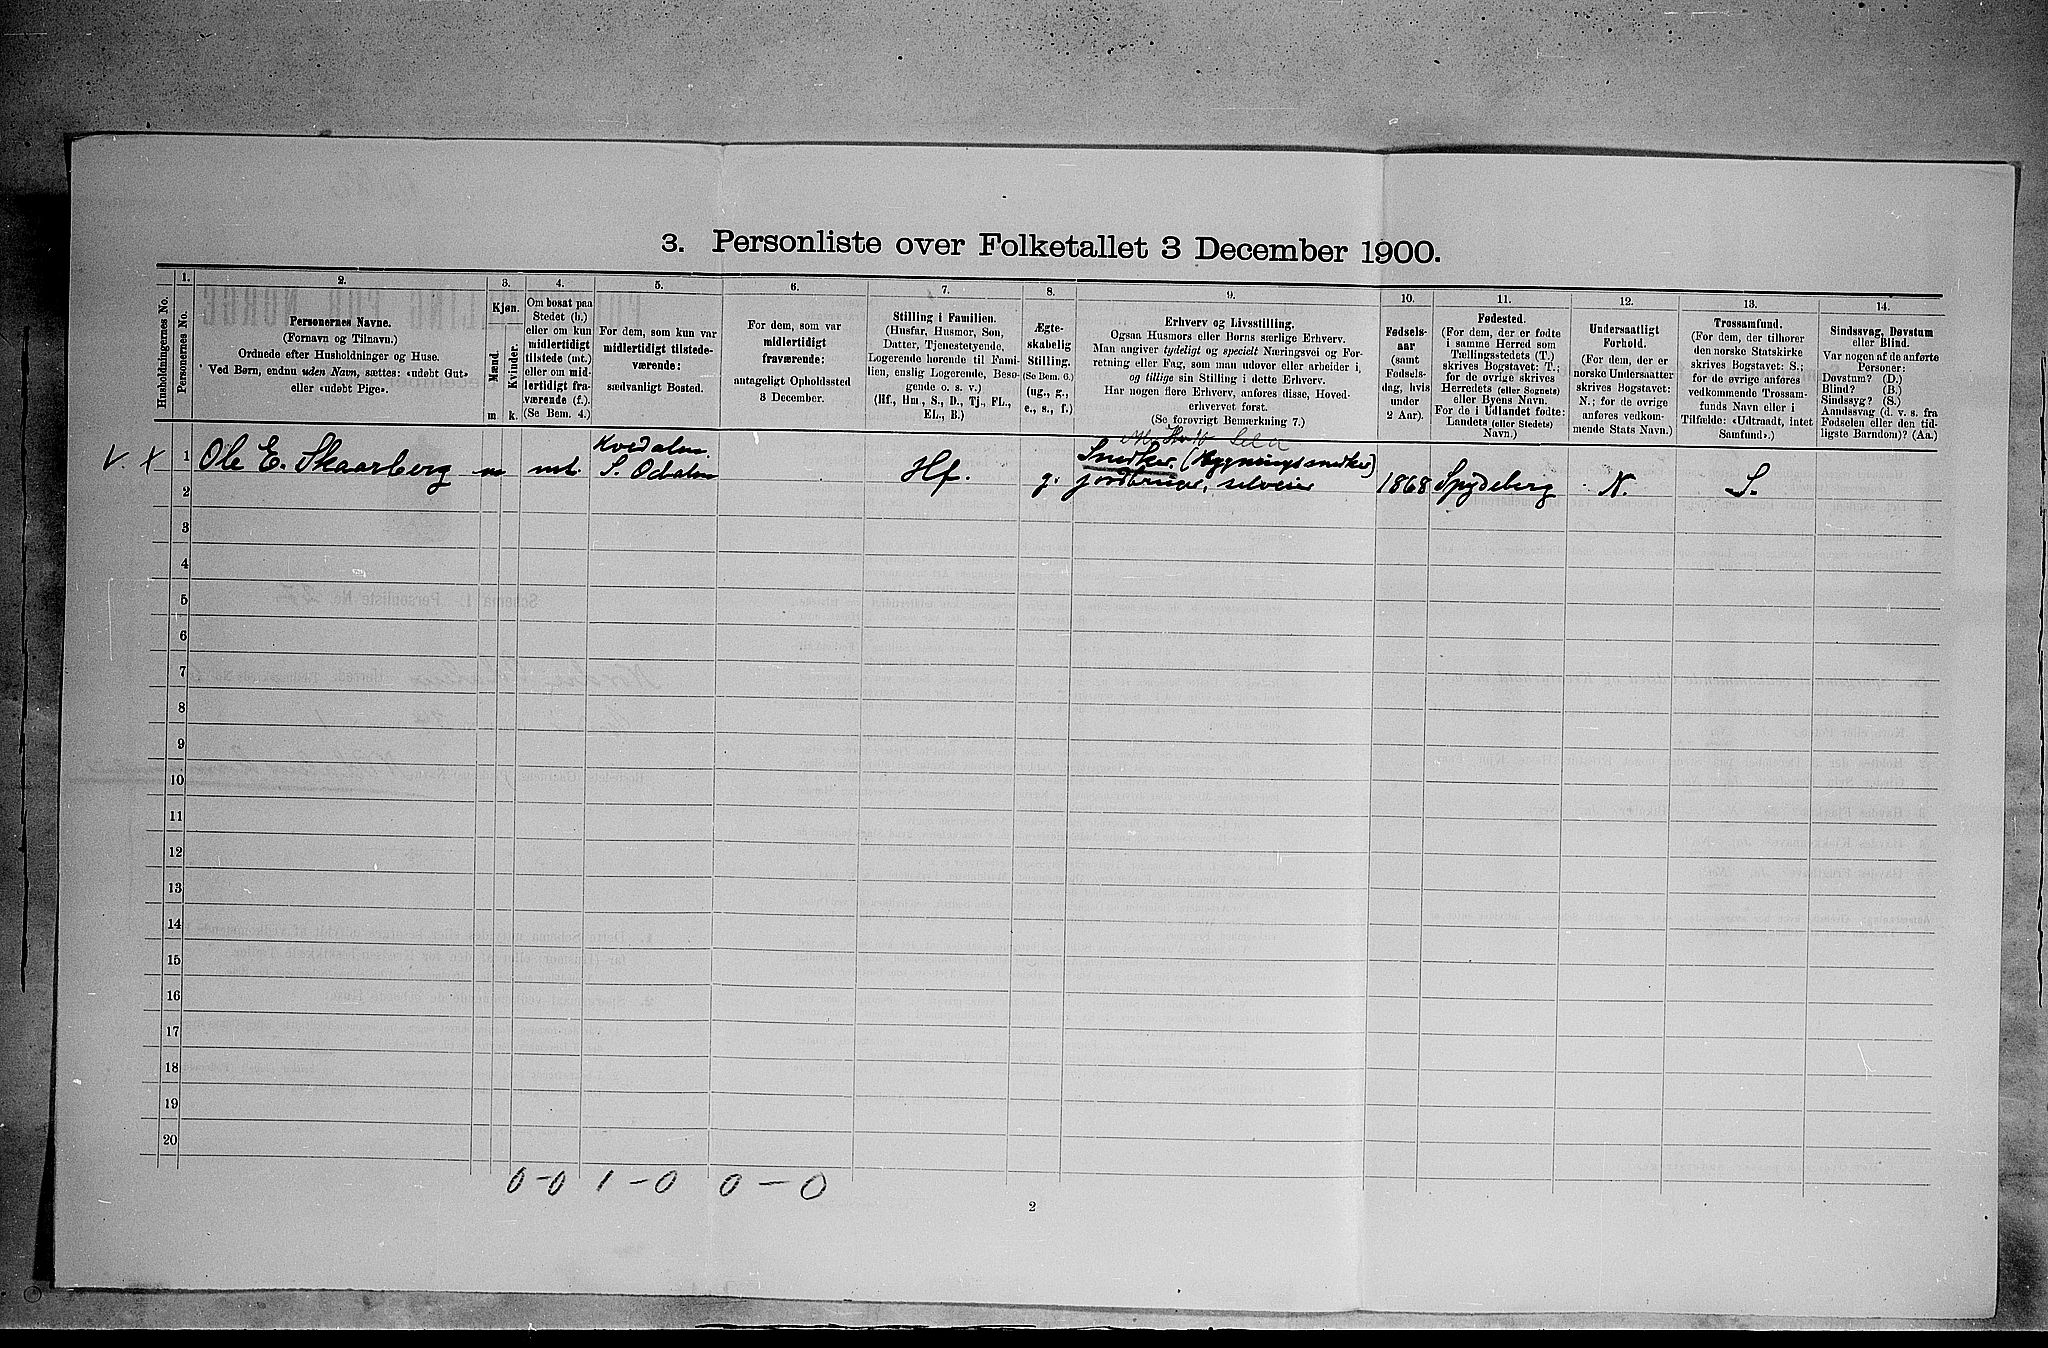 SAH, 1900 census for Nord-Odal, 1900, p. 708